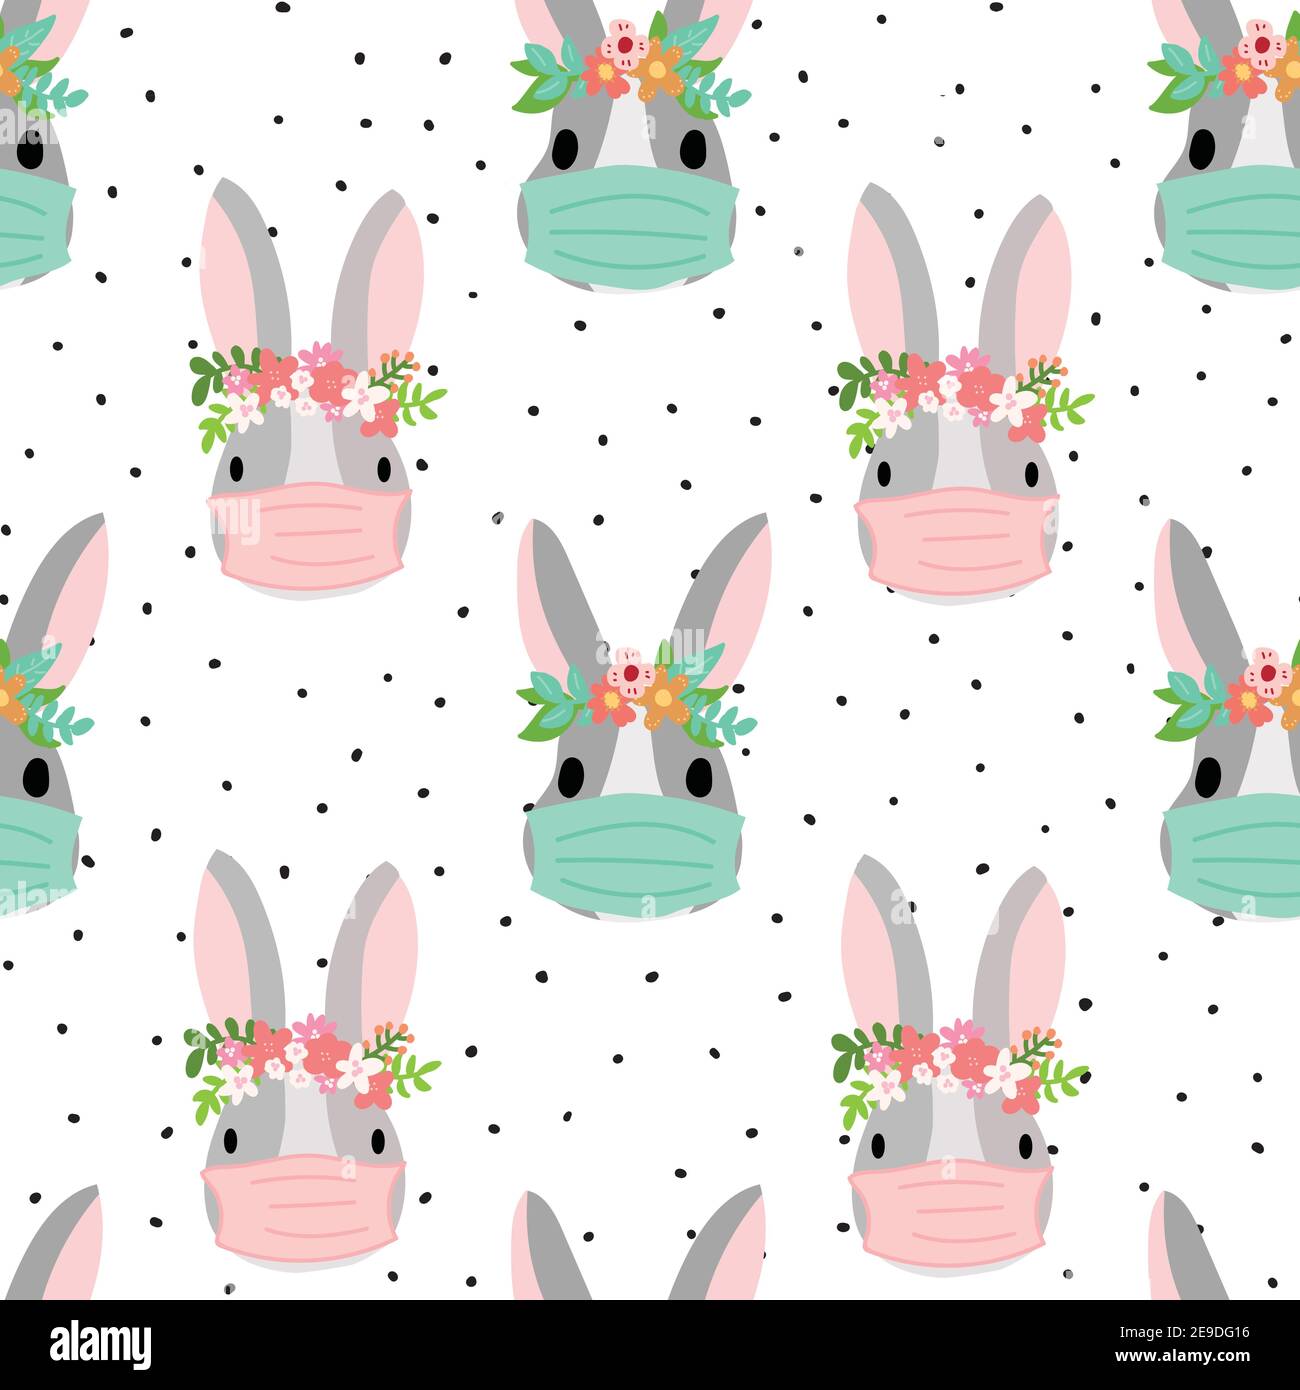 Cute Cow Seamless Background Repeating Pattern, Wallpaper